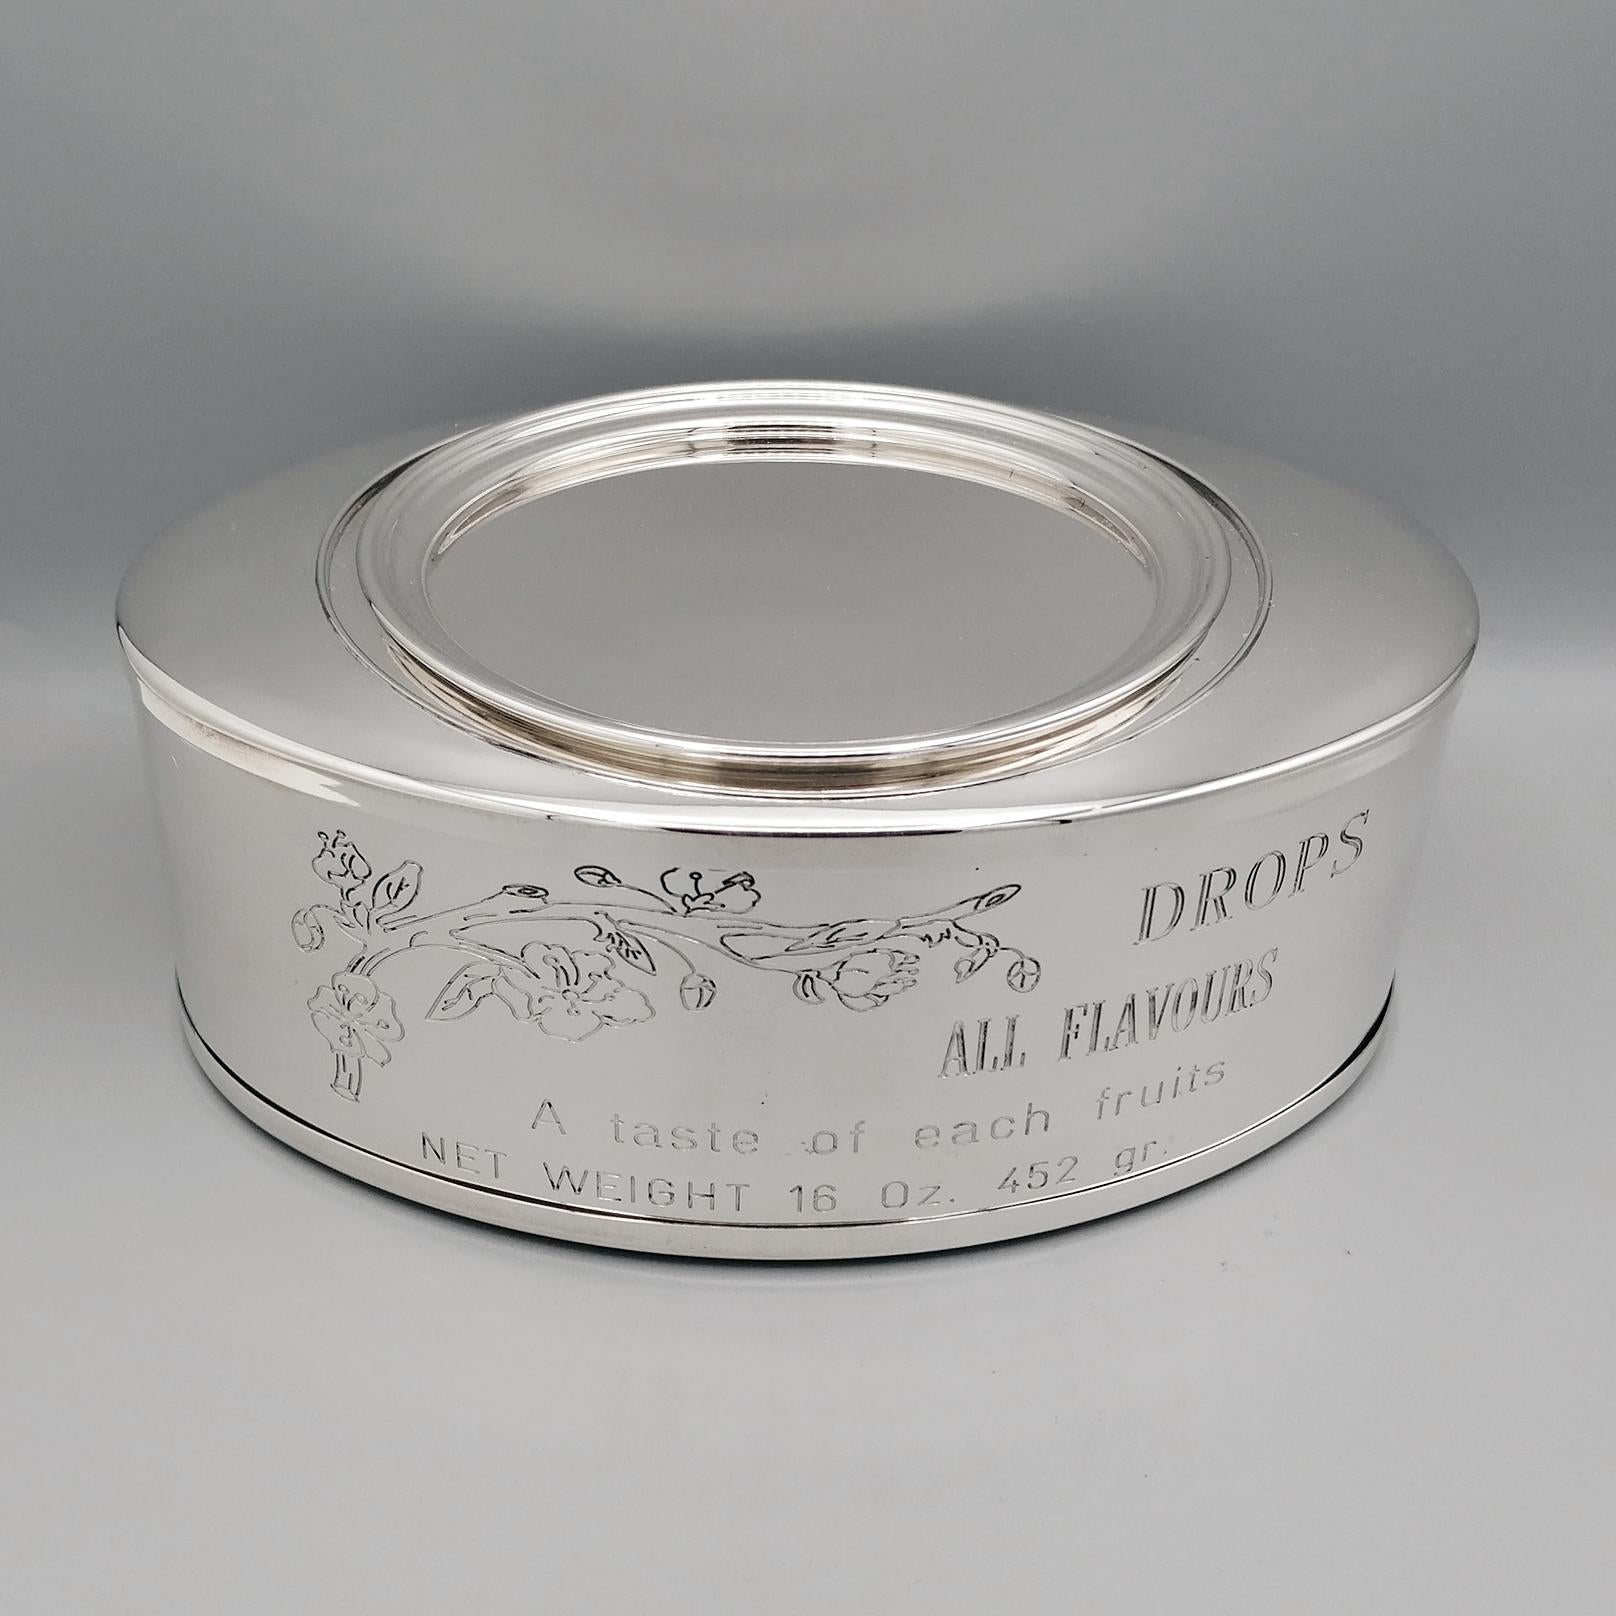 The box was made from an 800 silver plate and subsequently shaped into an oval shape.
The external band has been engraved faithfully reproducing the old candy boxes from the first half of the 20th century.
Another box made of food grade plastic